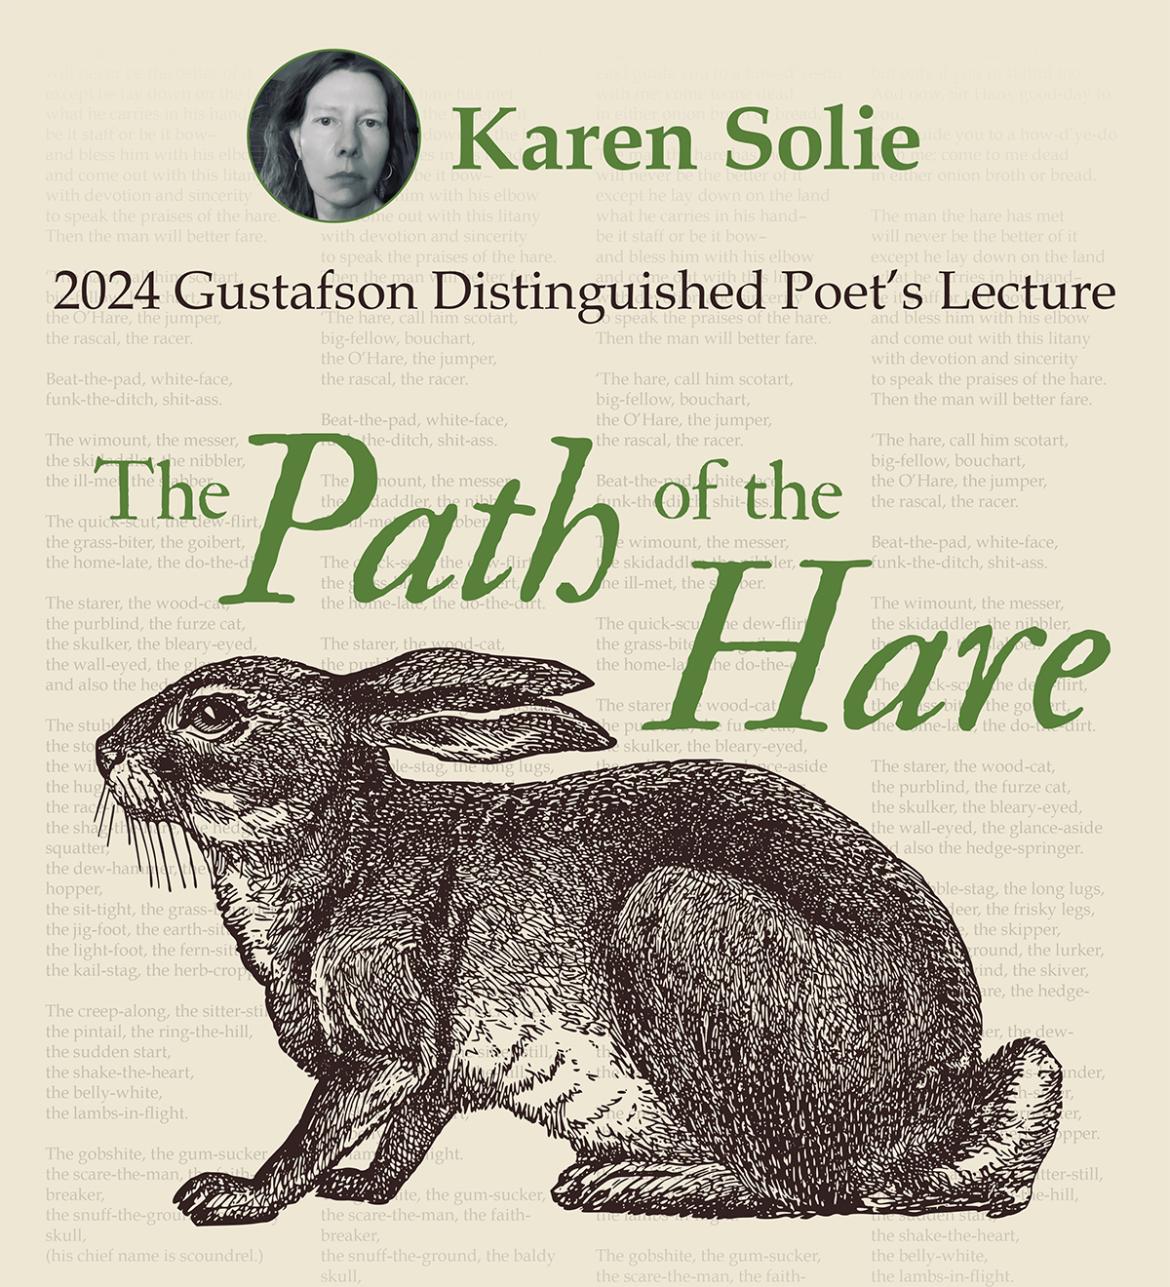 Graphic of a hare with the text Karen Solie 2024 Gustafson Distinguished Poet's Lecture, The Path of the Hare.